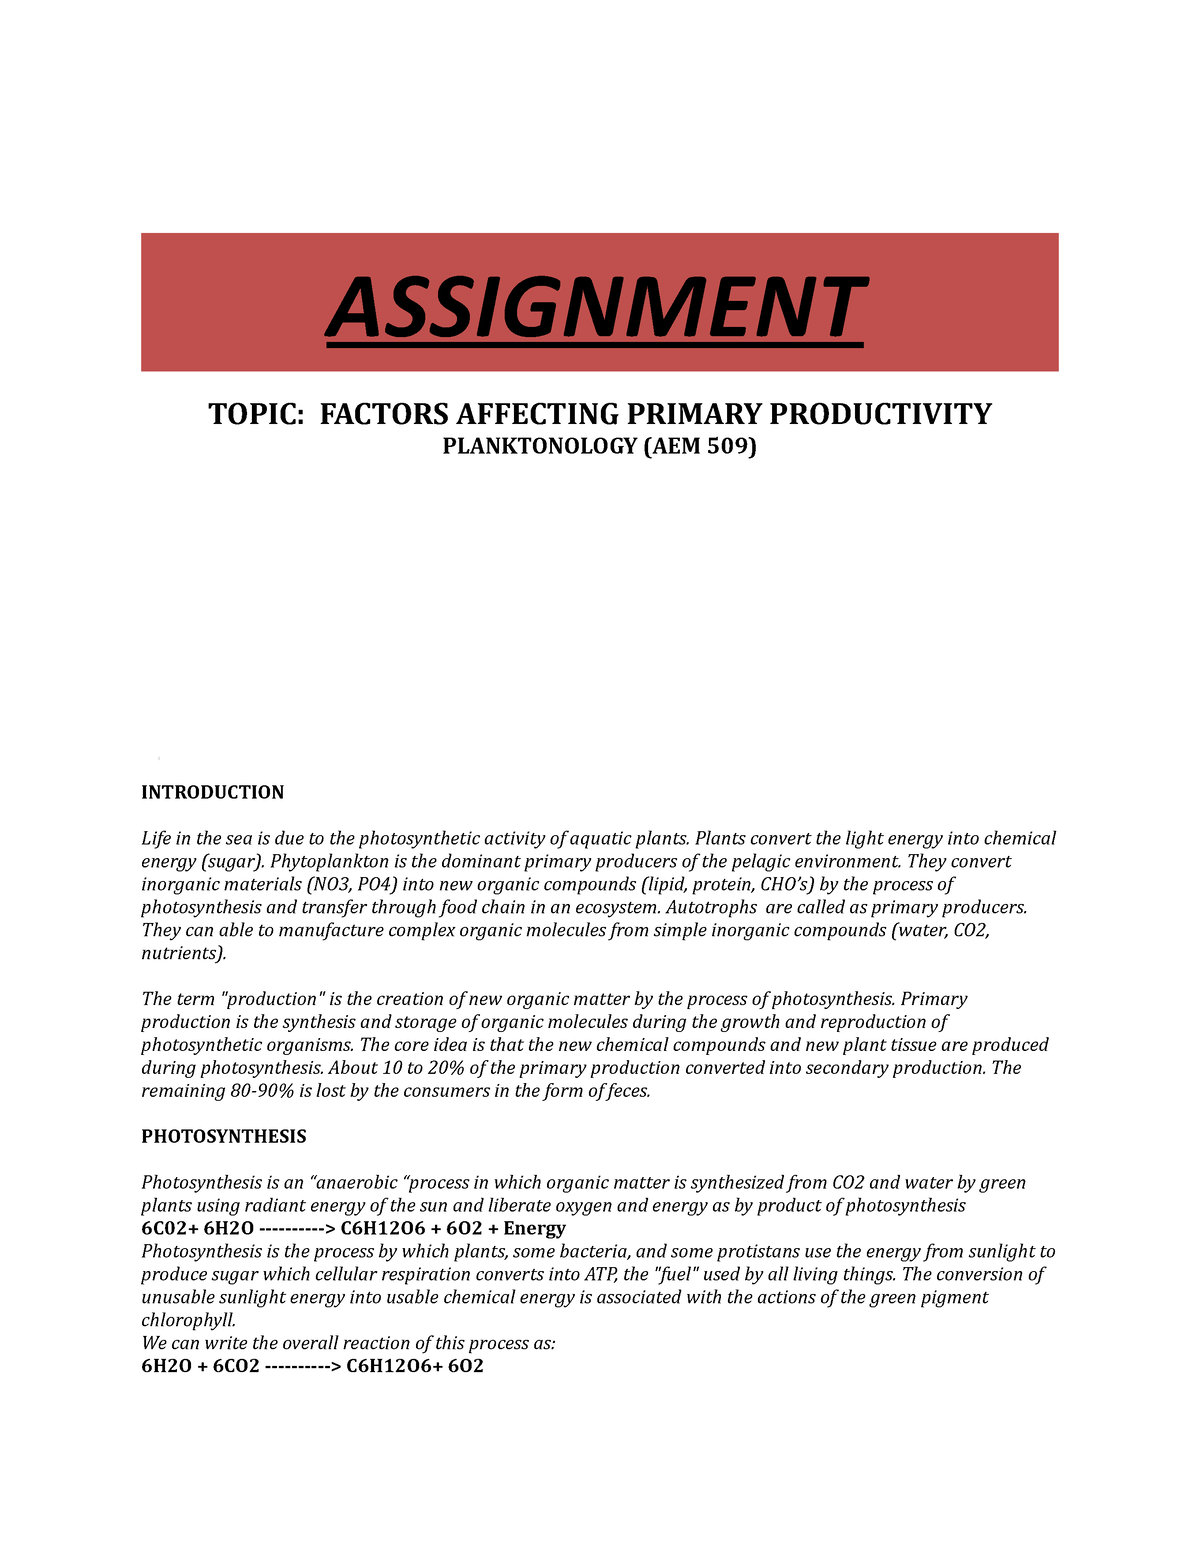 primary productivity assignment